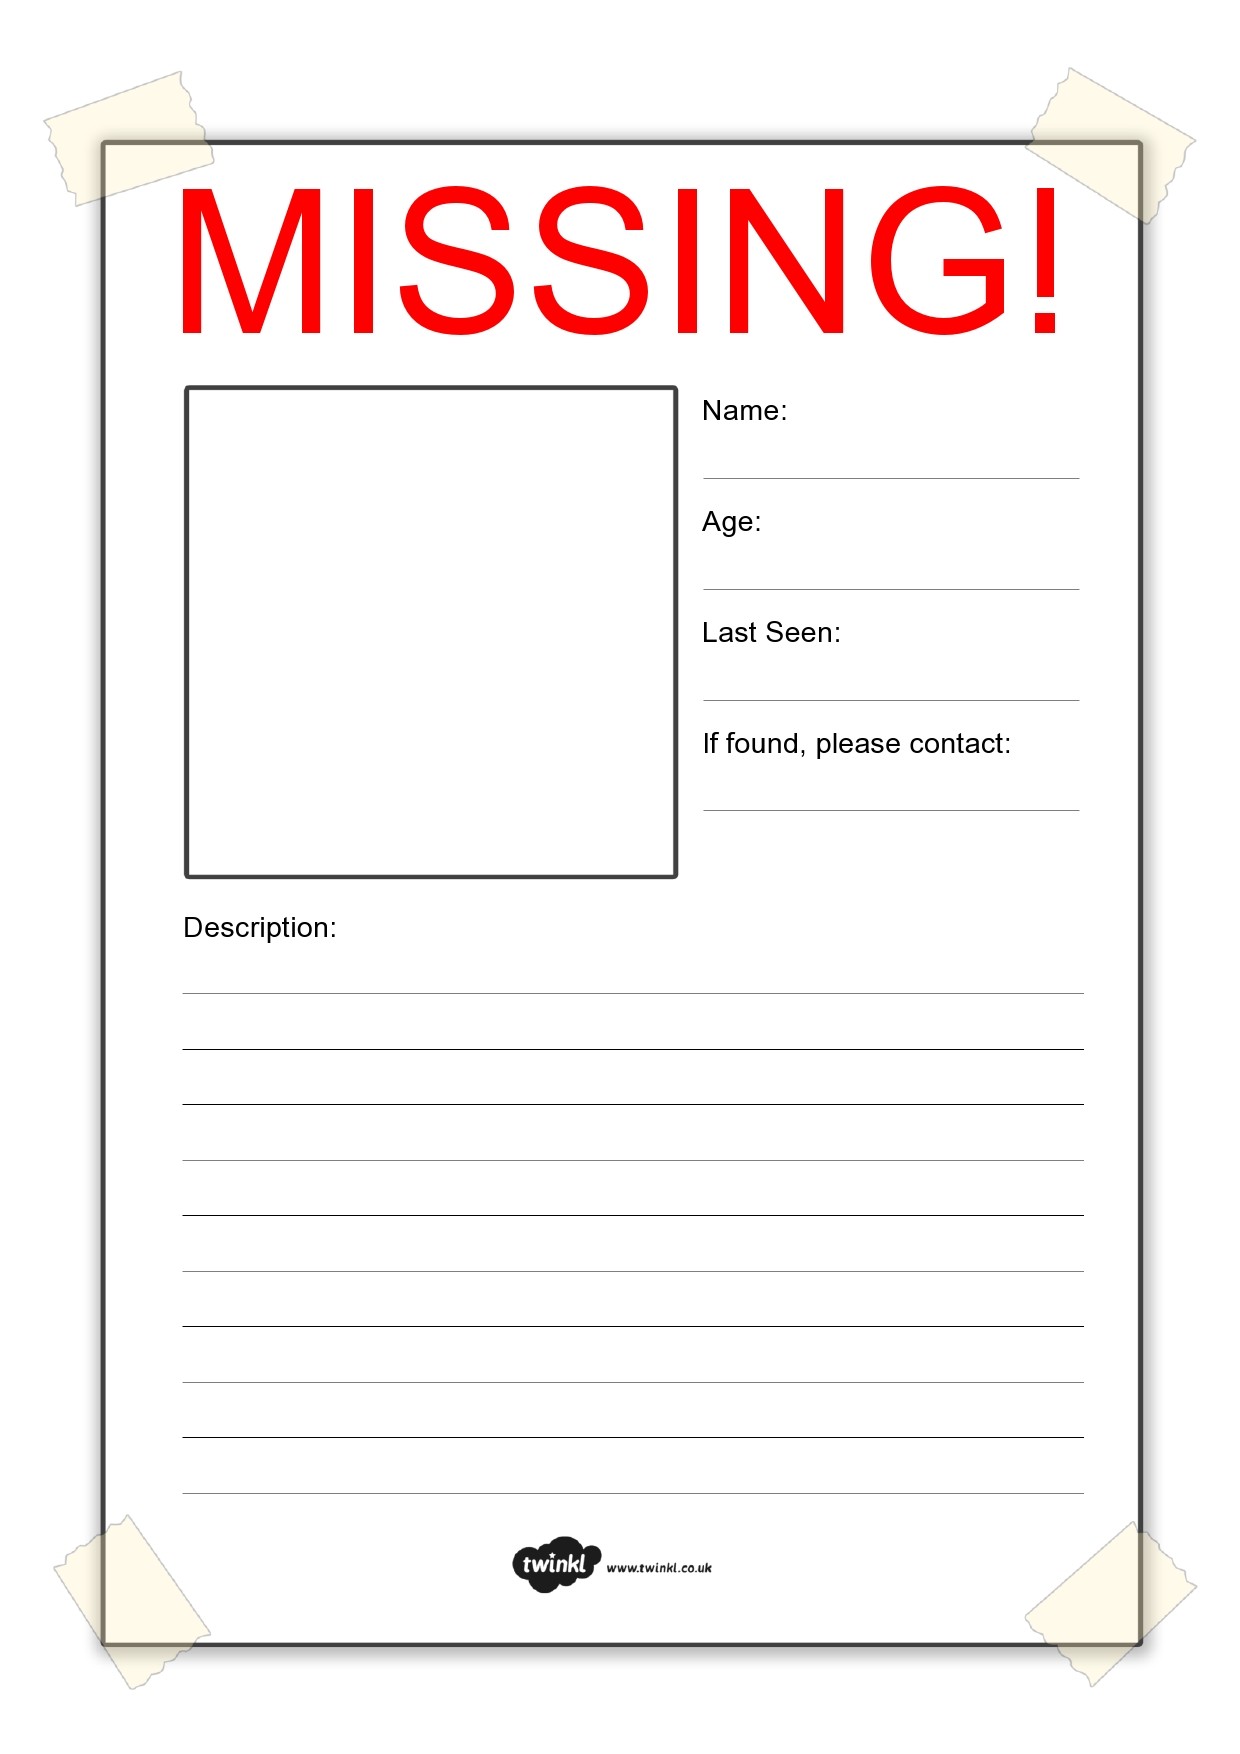 40 Printable Missing Poster Templates (Flyers & Signs)